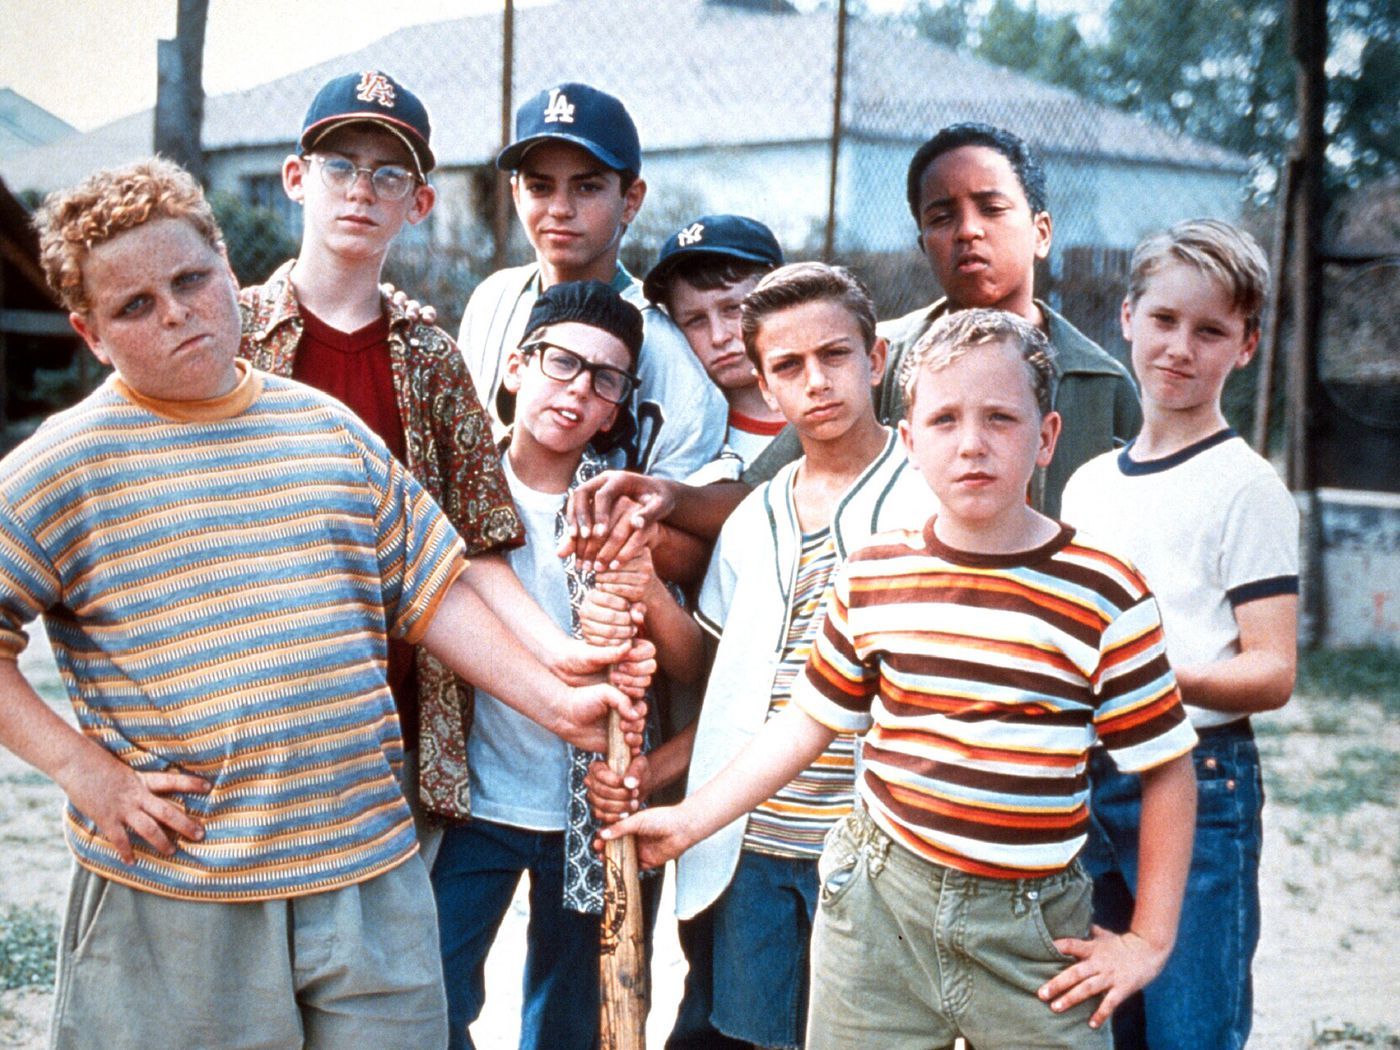 The Sandlot: Ranking each character's fantasy potential